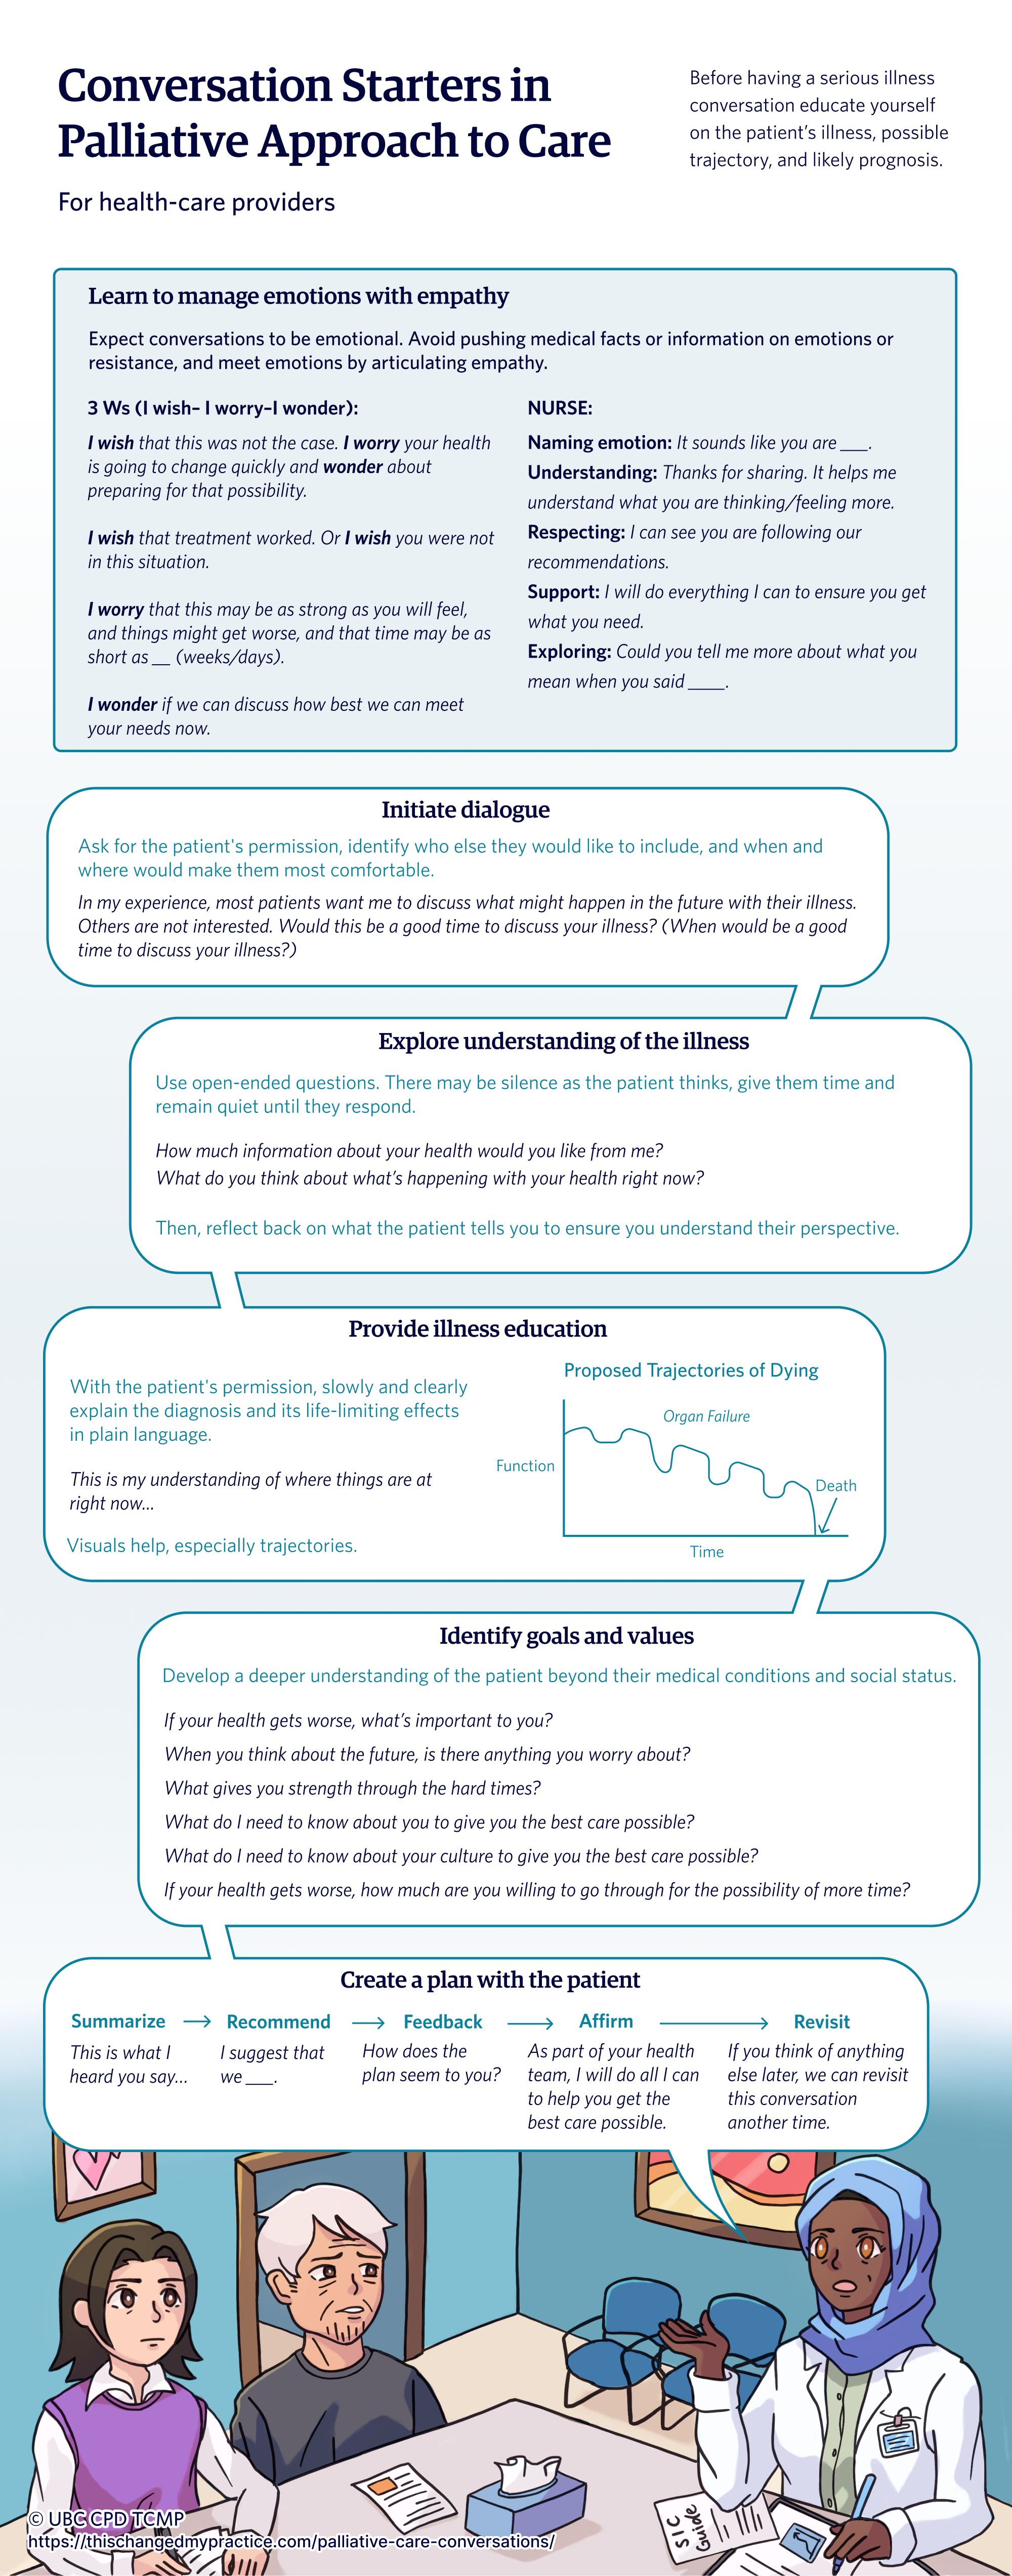 Handout for palliative approach to care and serious illness conversations